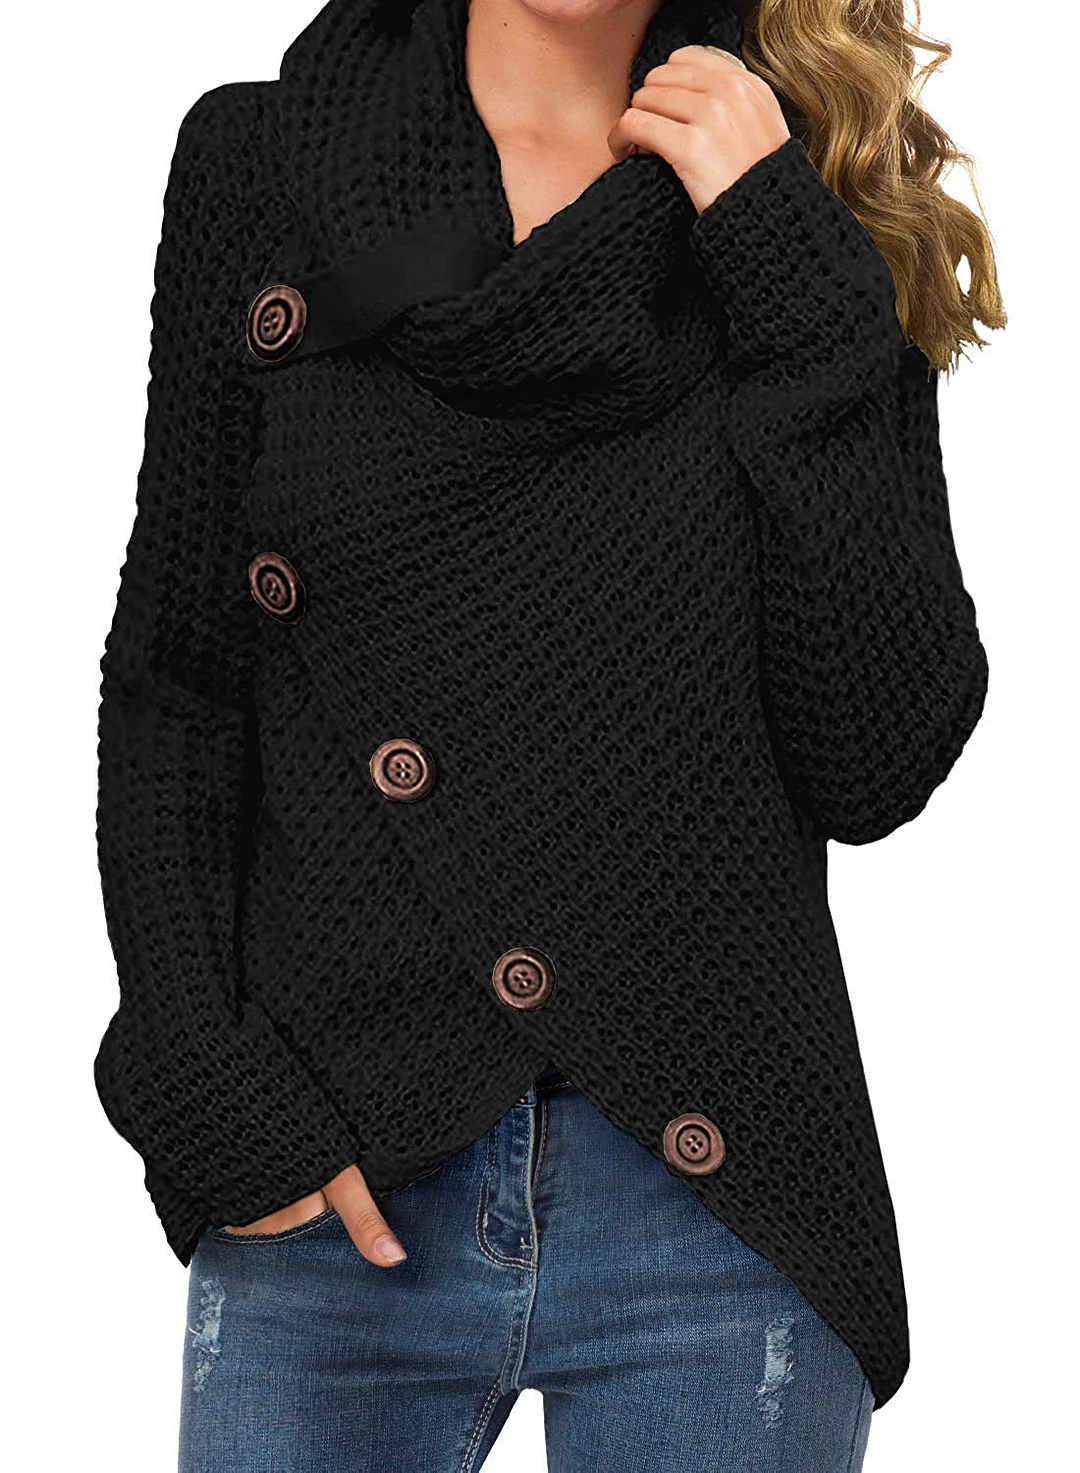 Women's Casual Turtle Cowl Neck Asymmetric Hem Wrap Pullover Chunky Button Knit Sweater